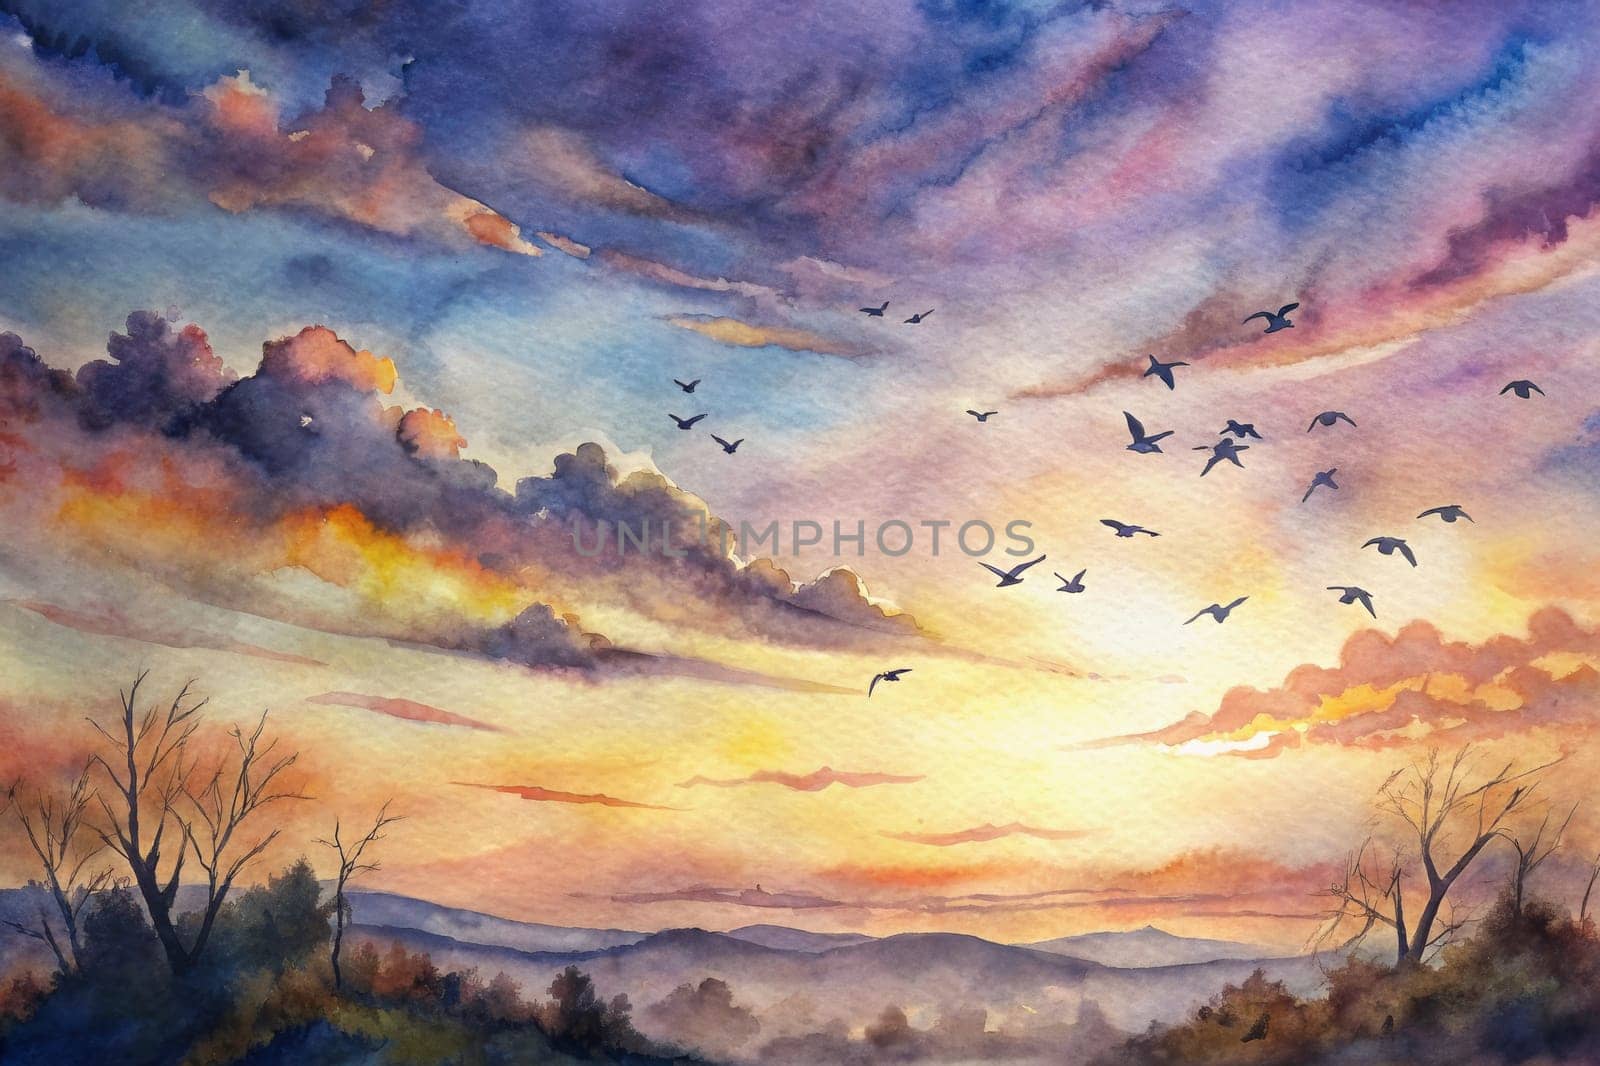 A watercolor painting depicts a sunset over a landscape of rolling hills, with a cluster of birds flying in formation against a colorful sky. The sky is painted in shades of purple, blue, orange, and yellow, with clouds creating a dramatic effect. The silhouettes of the birds are clear against the bright sky, and they appear to be flying towards the horizon. The hills in the foreground are painted in shades of green and brown, and there is a hint of fog in the valleys.